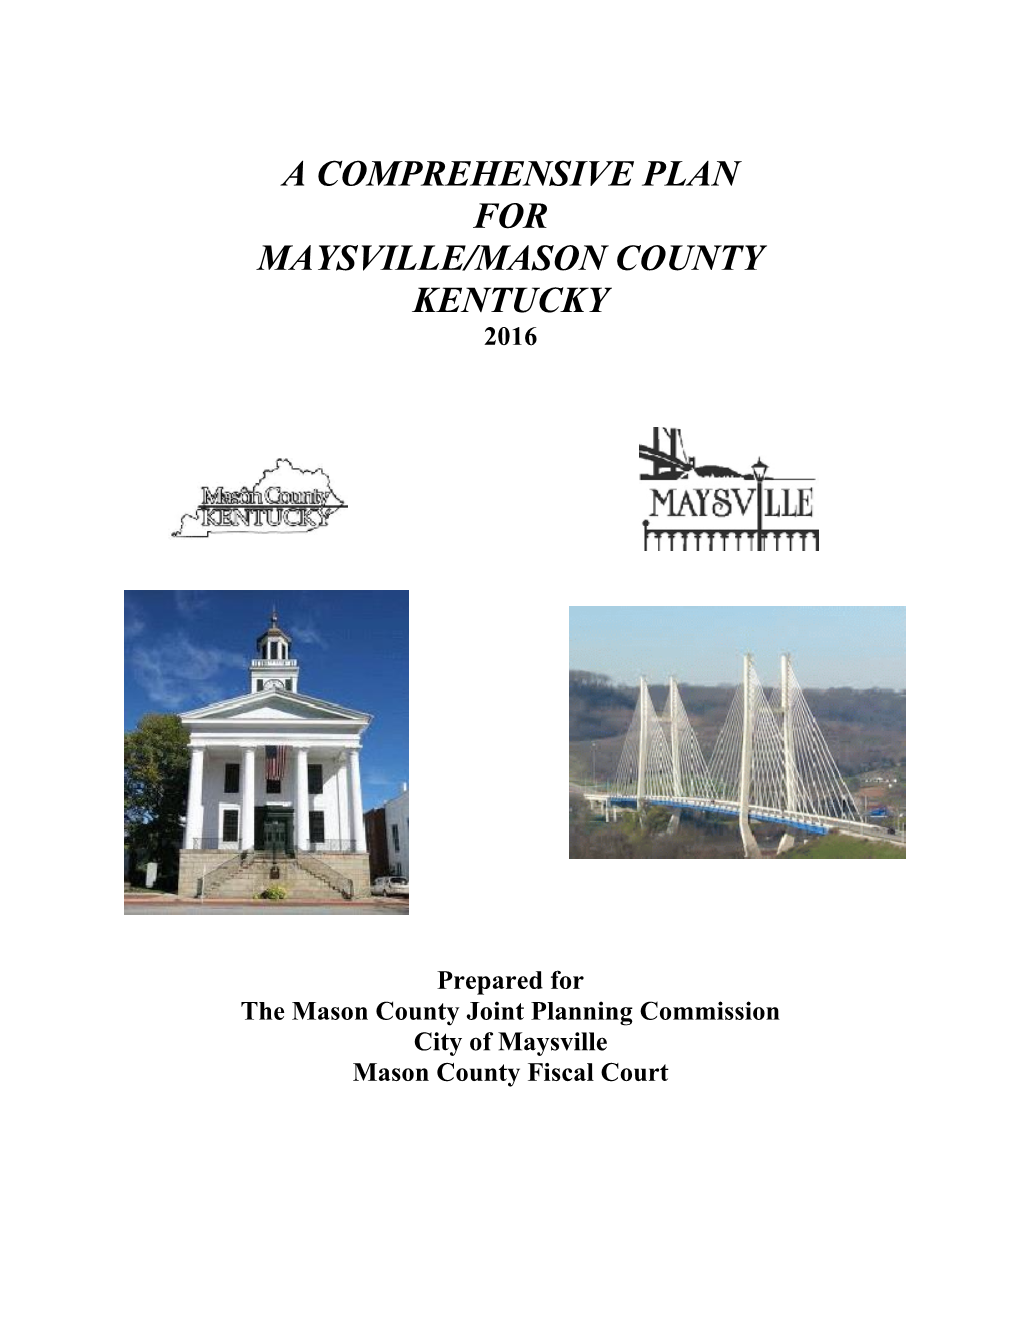 Maysville and Mason County Comprehensive Plan 2016